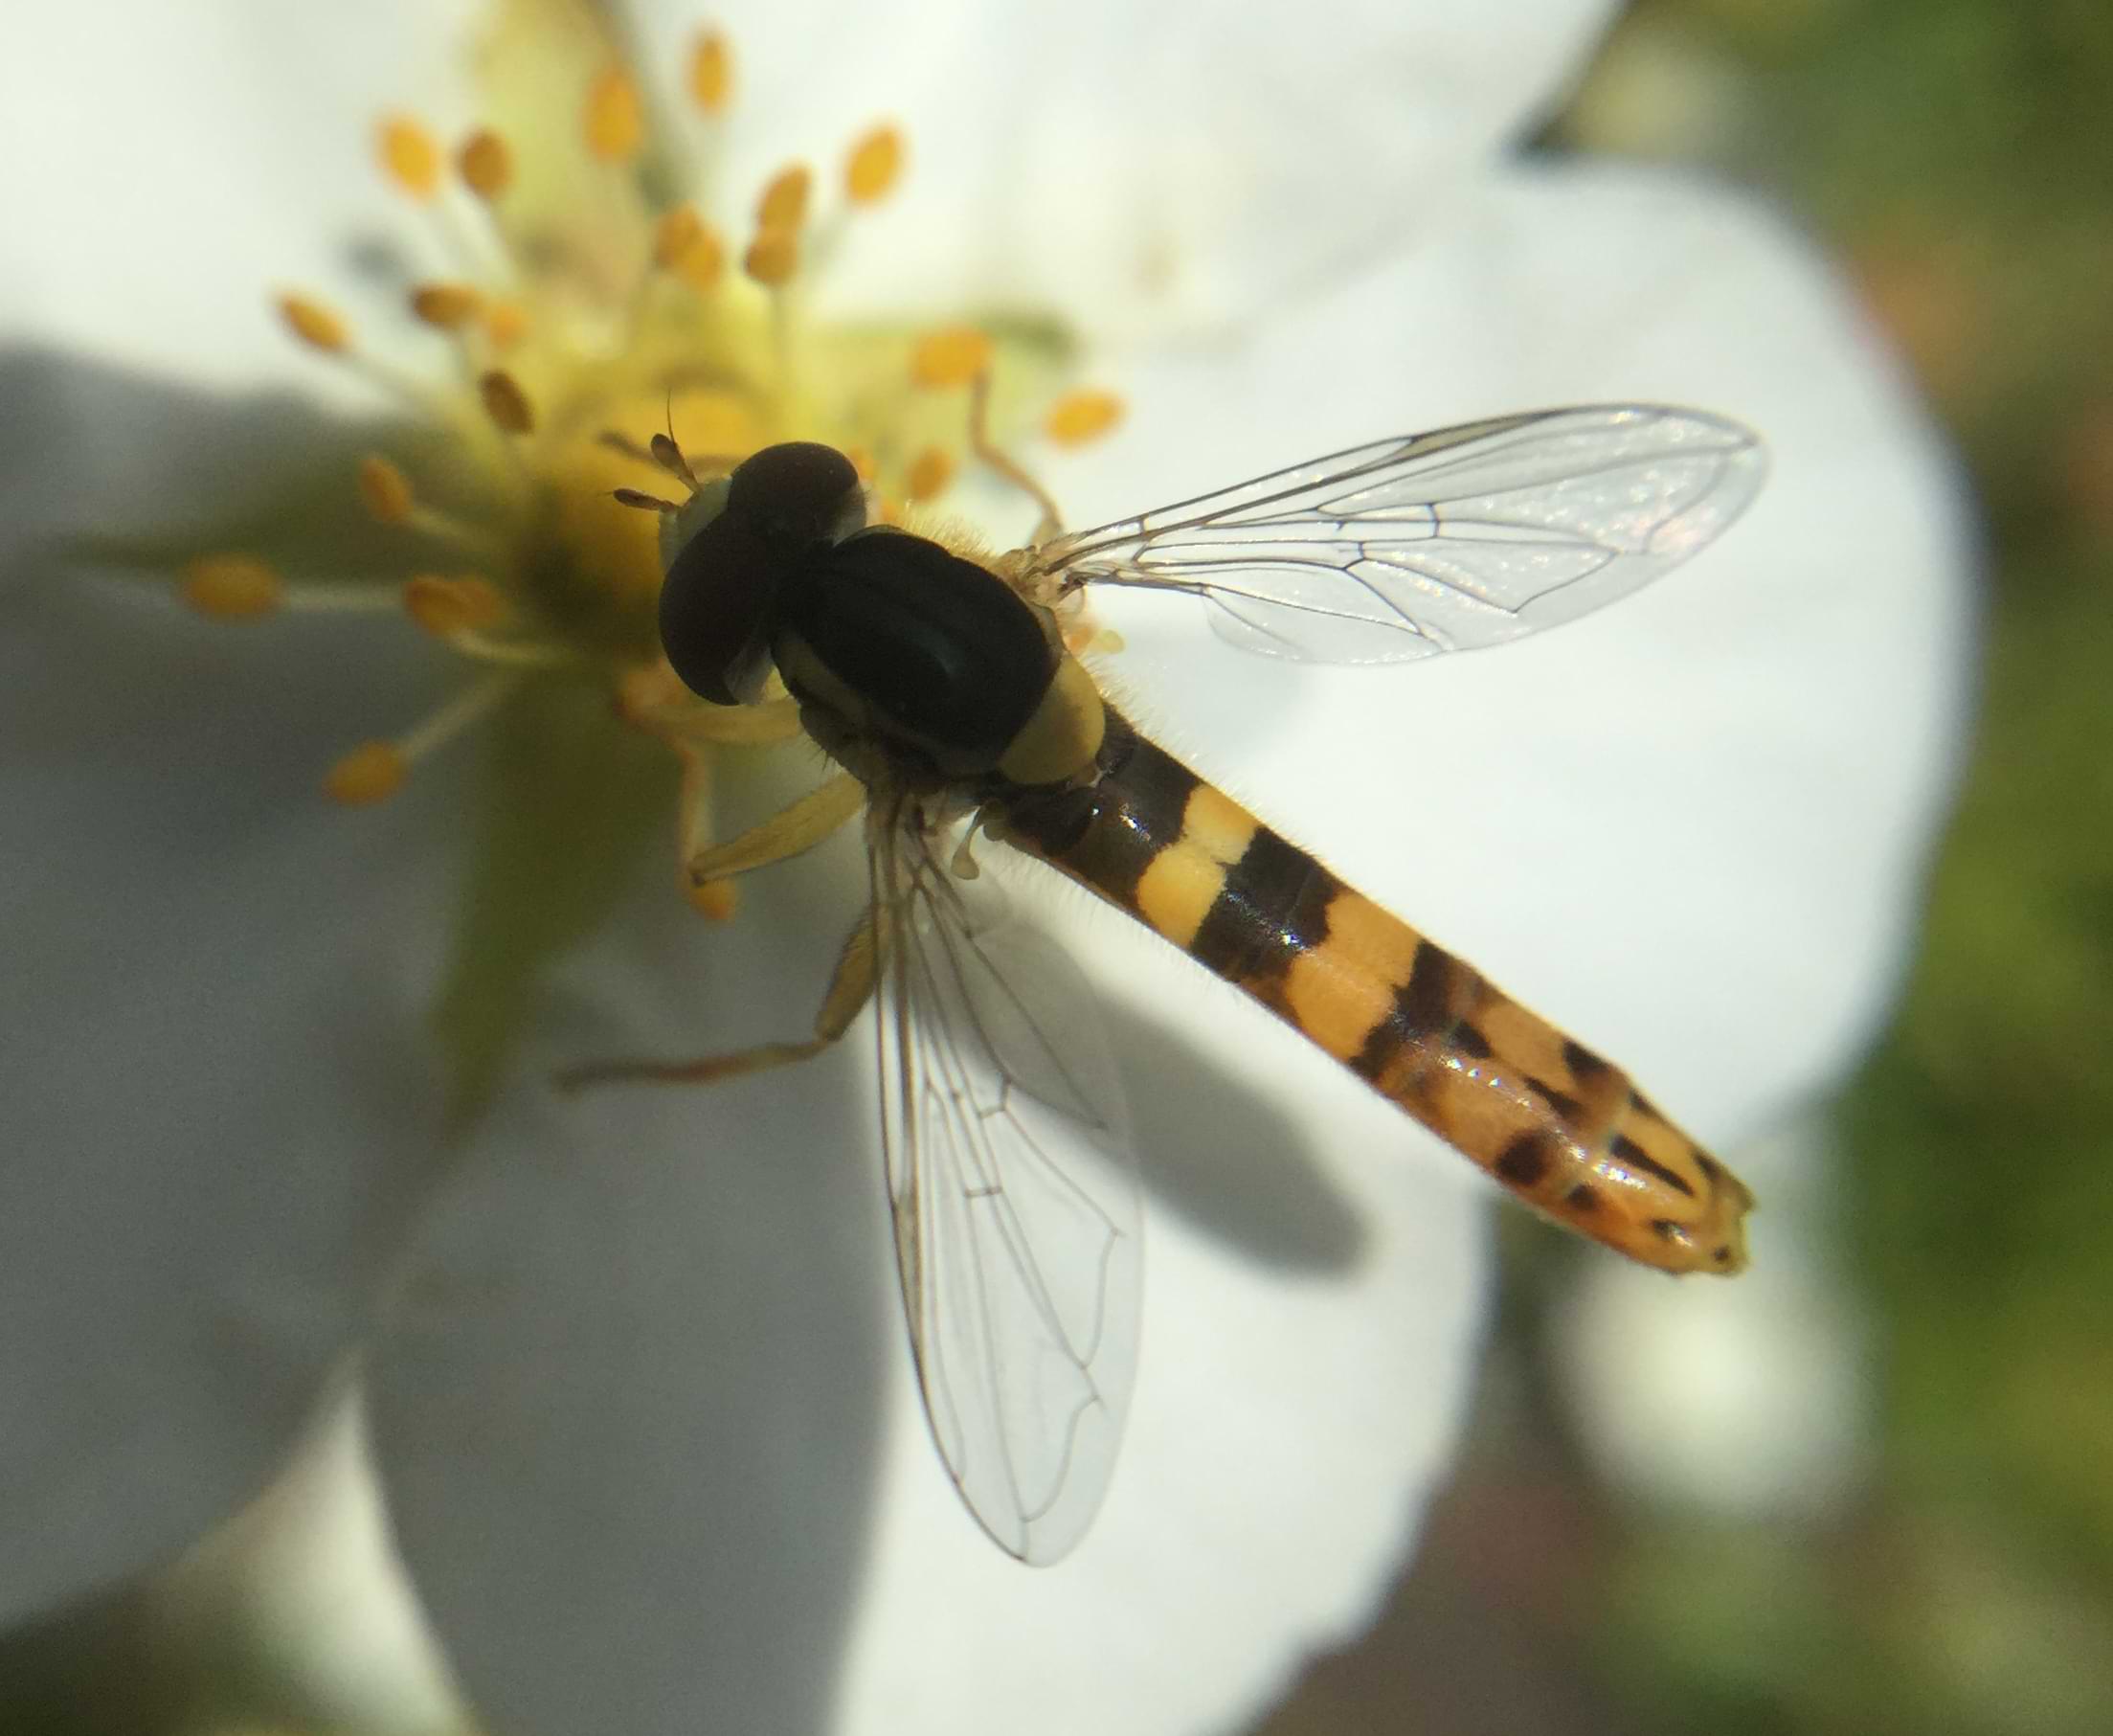 A small yellow and black hoverfly with a long abdomen.